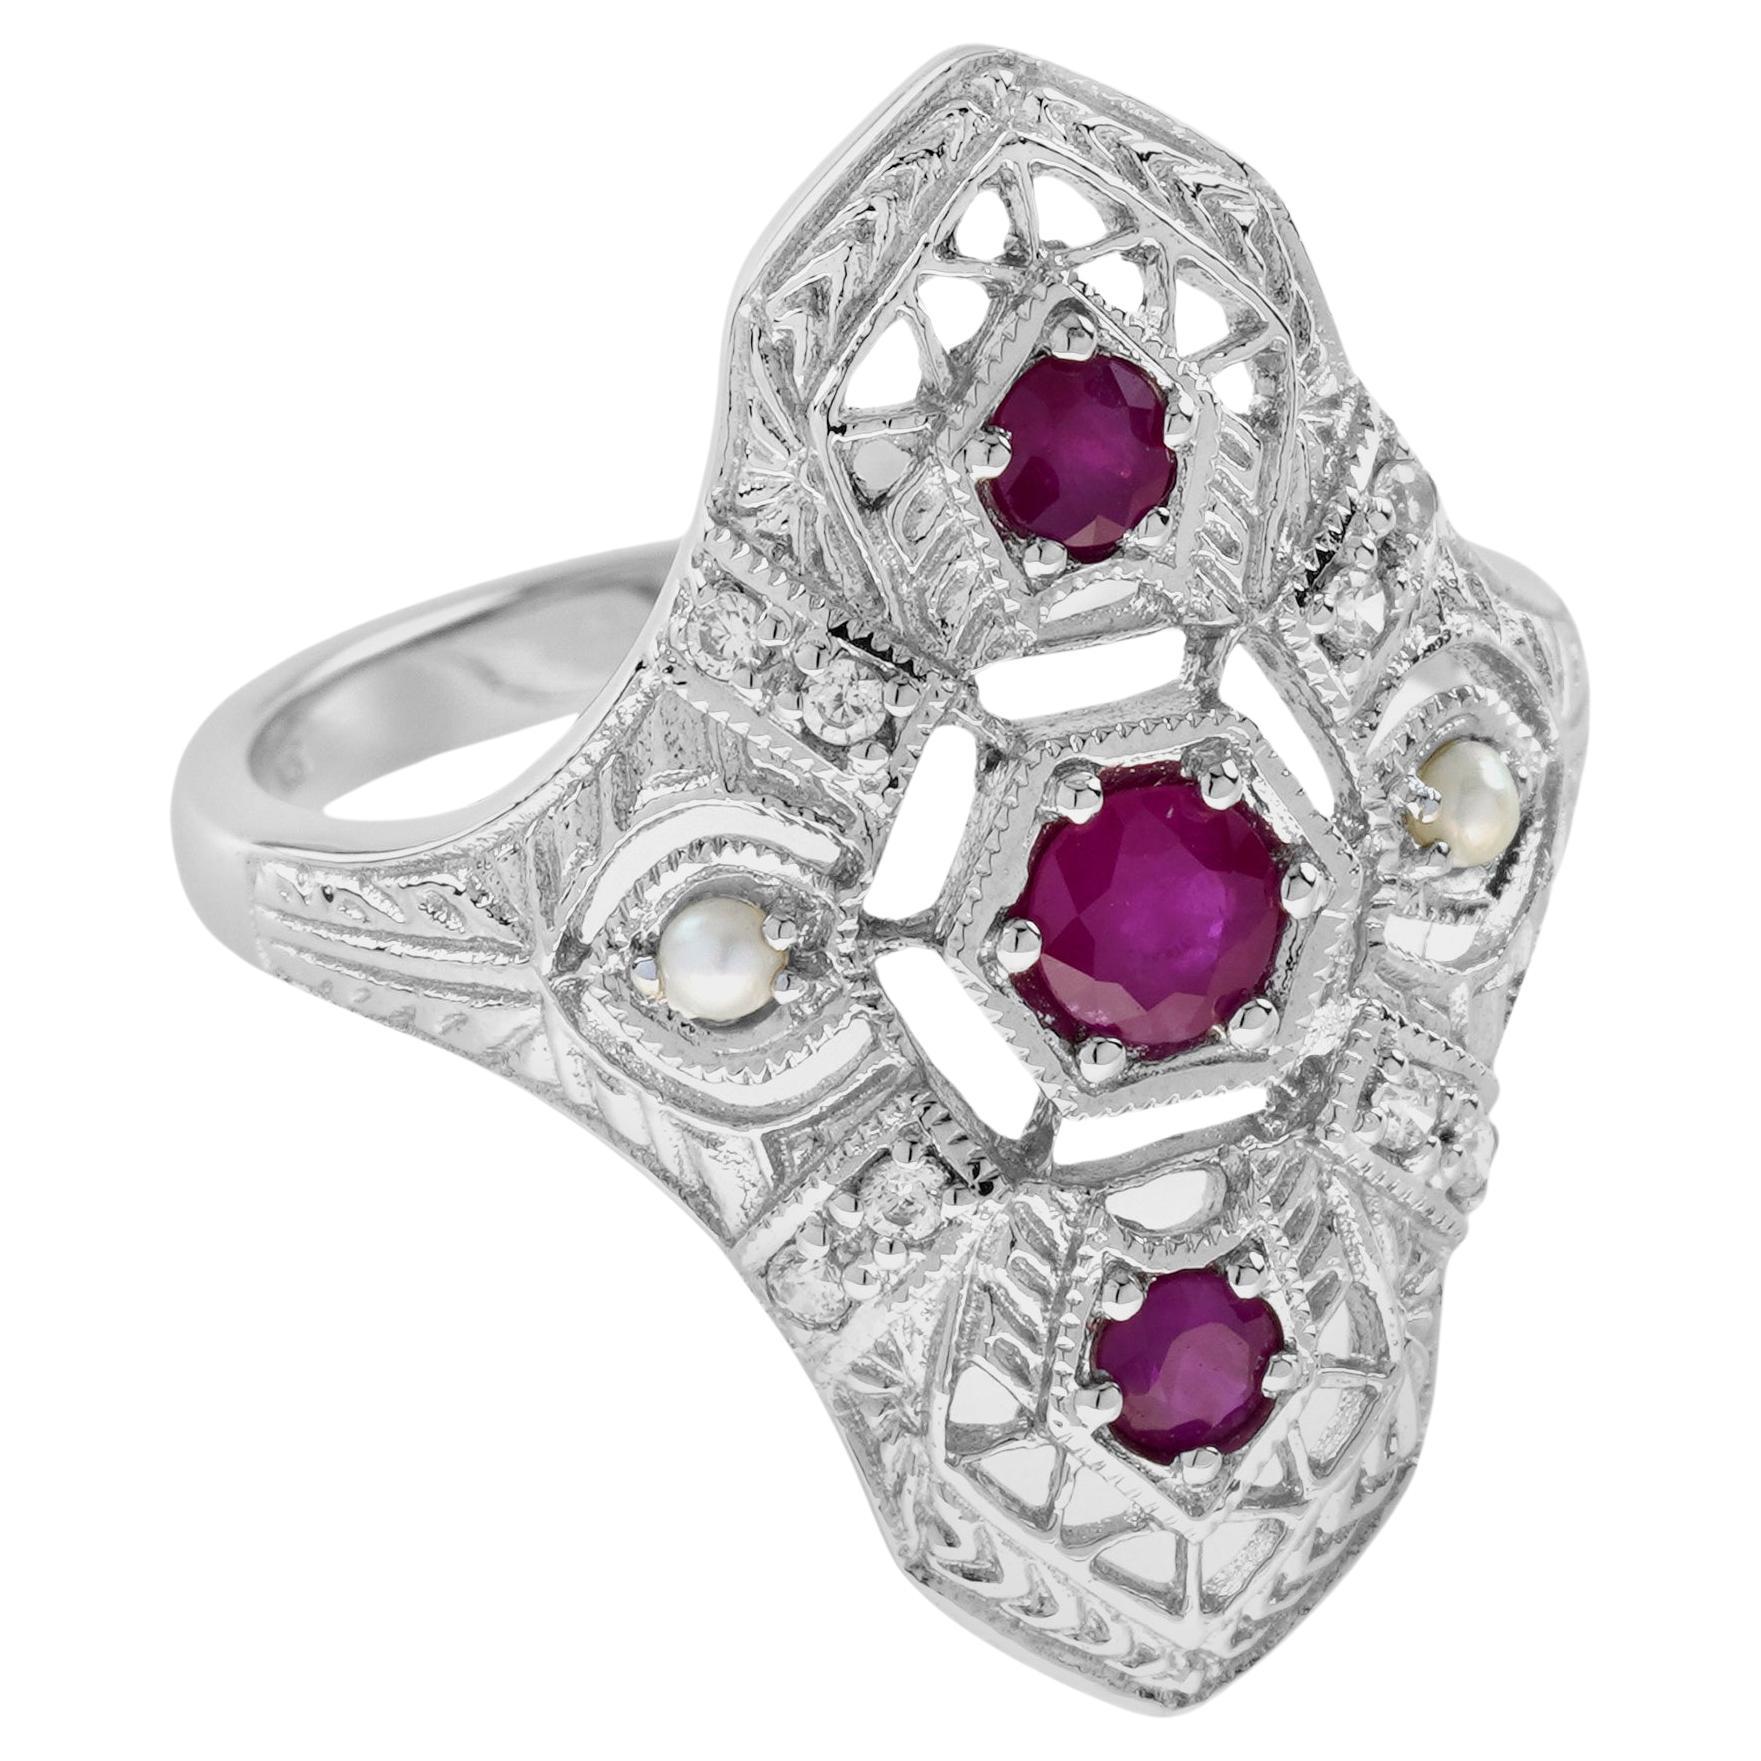 For Sale:  Natural Ruby Pearl Diamond Art Deco Style Dinner Ring in Solid 9K White Gold